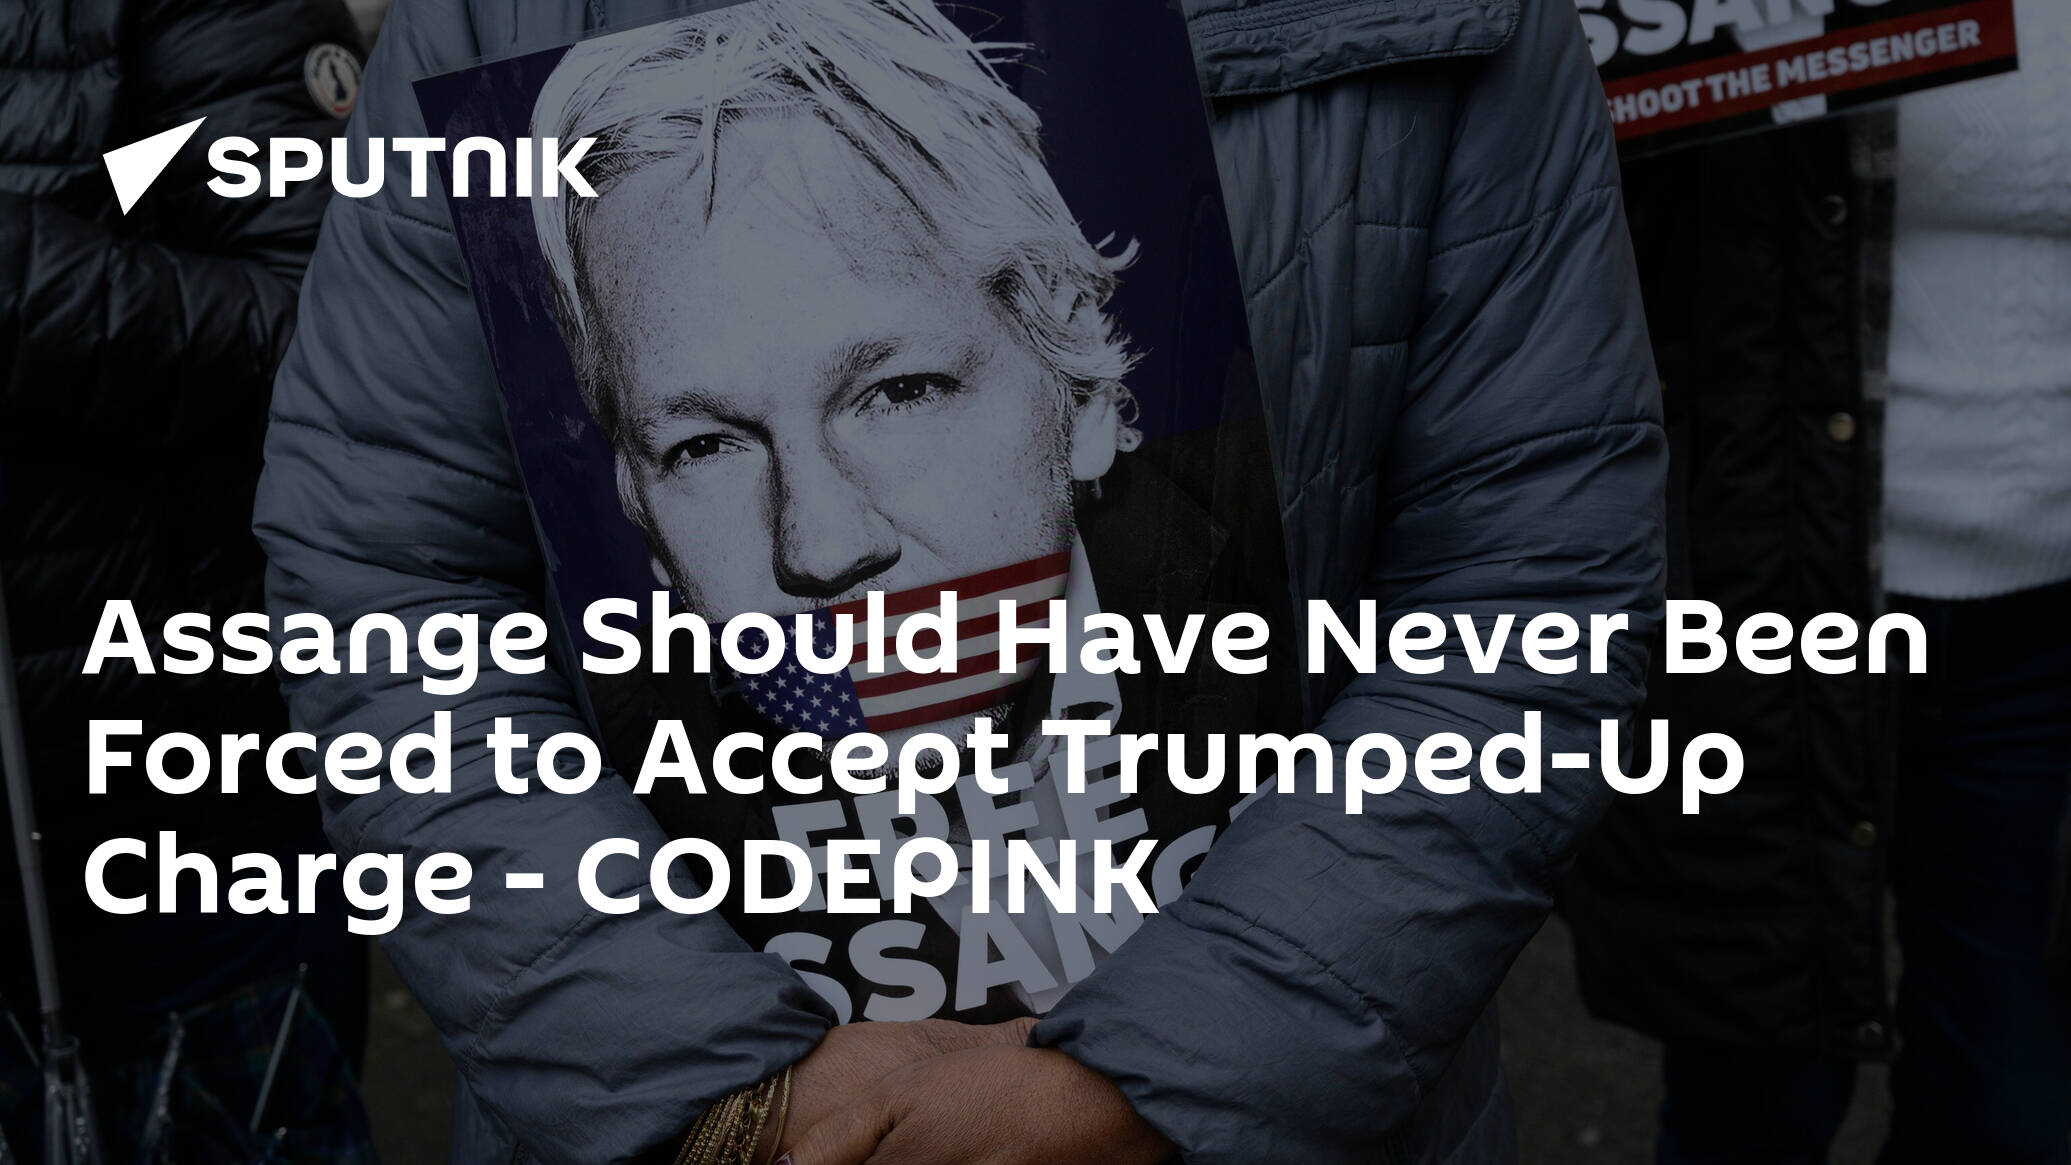 Assange Should Have Never Been Forced to Accept Trumped-Up Charge – CODEPINK